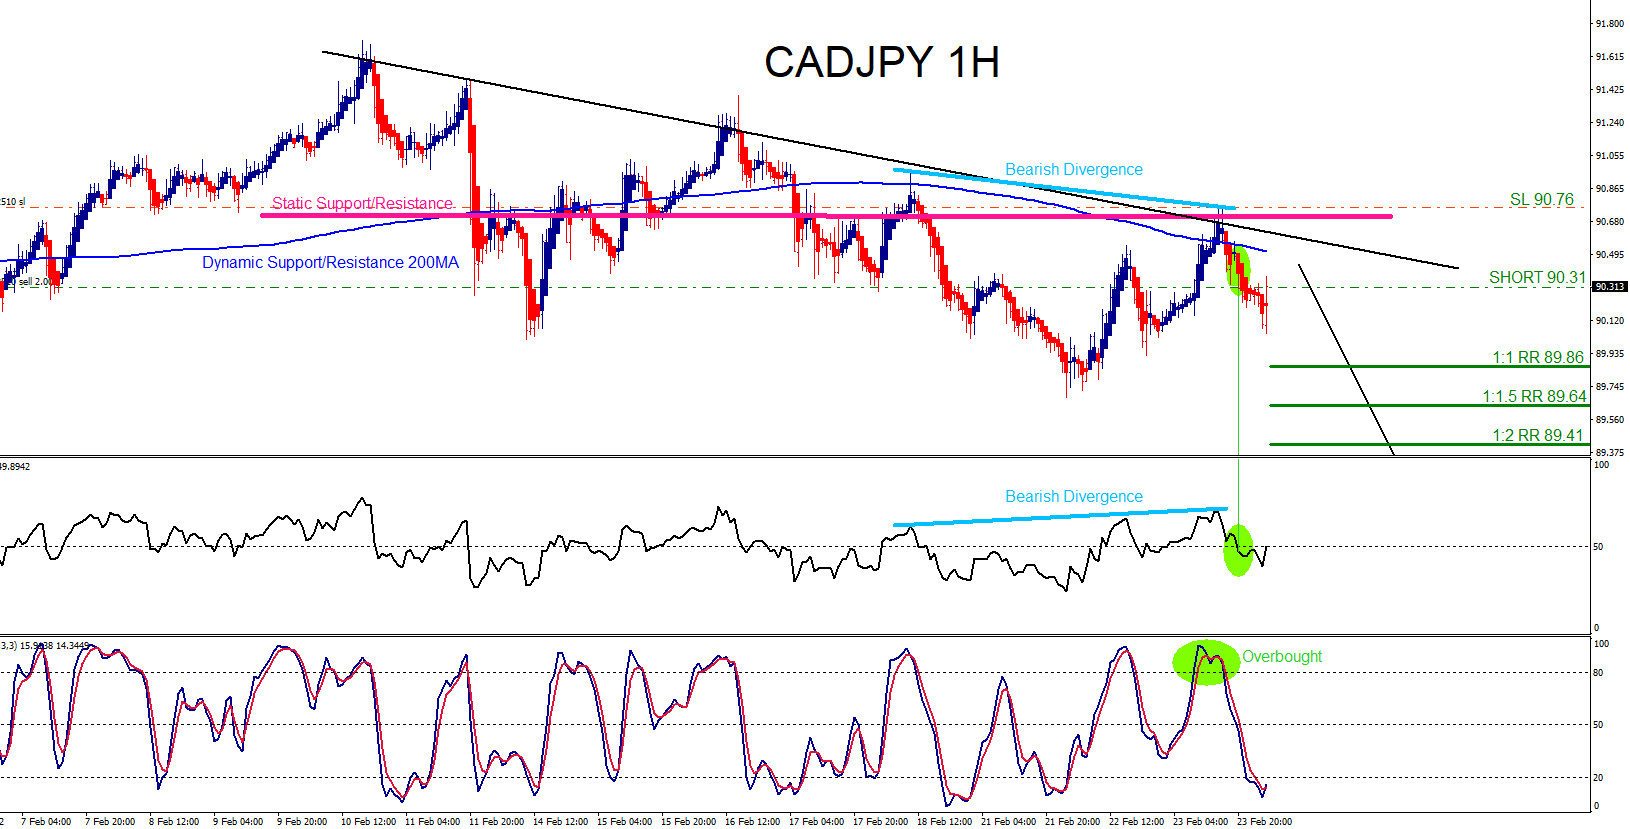 CADJPY : Catching the Move Lower